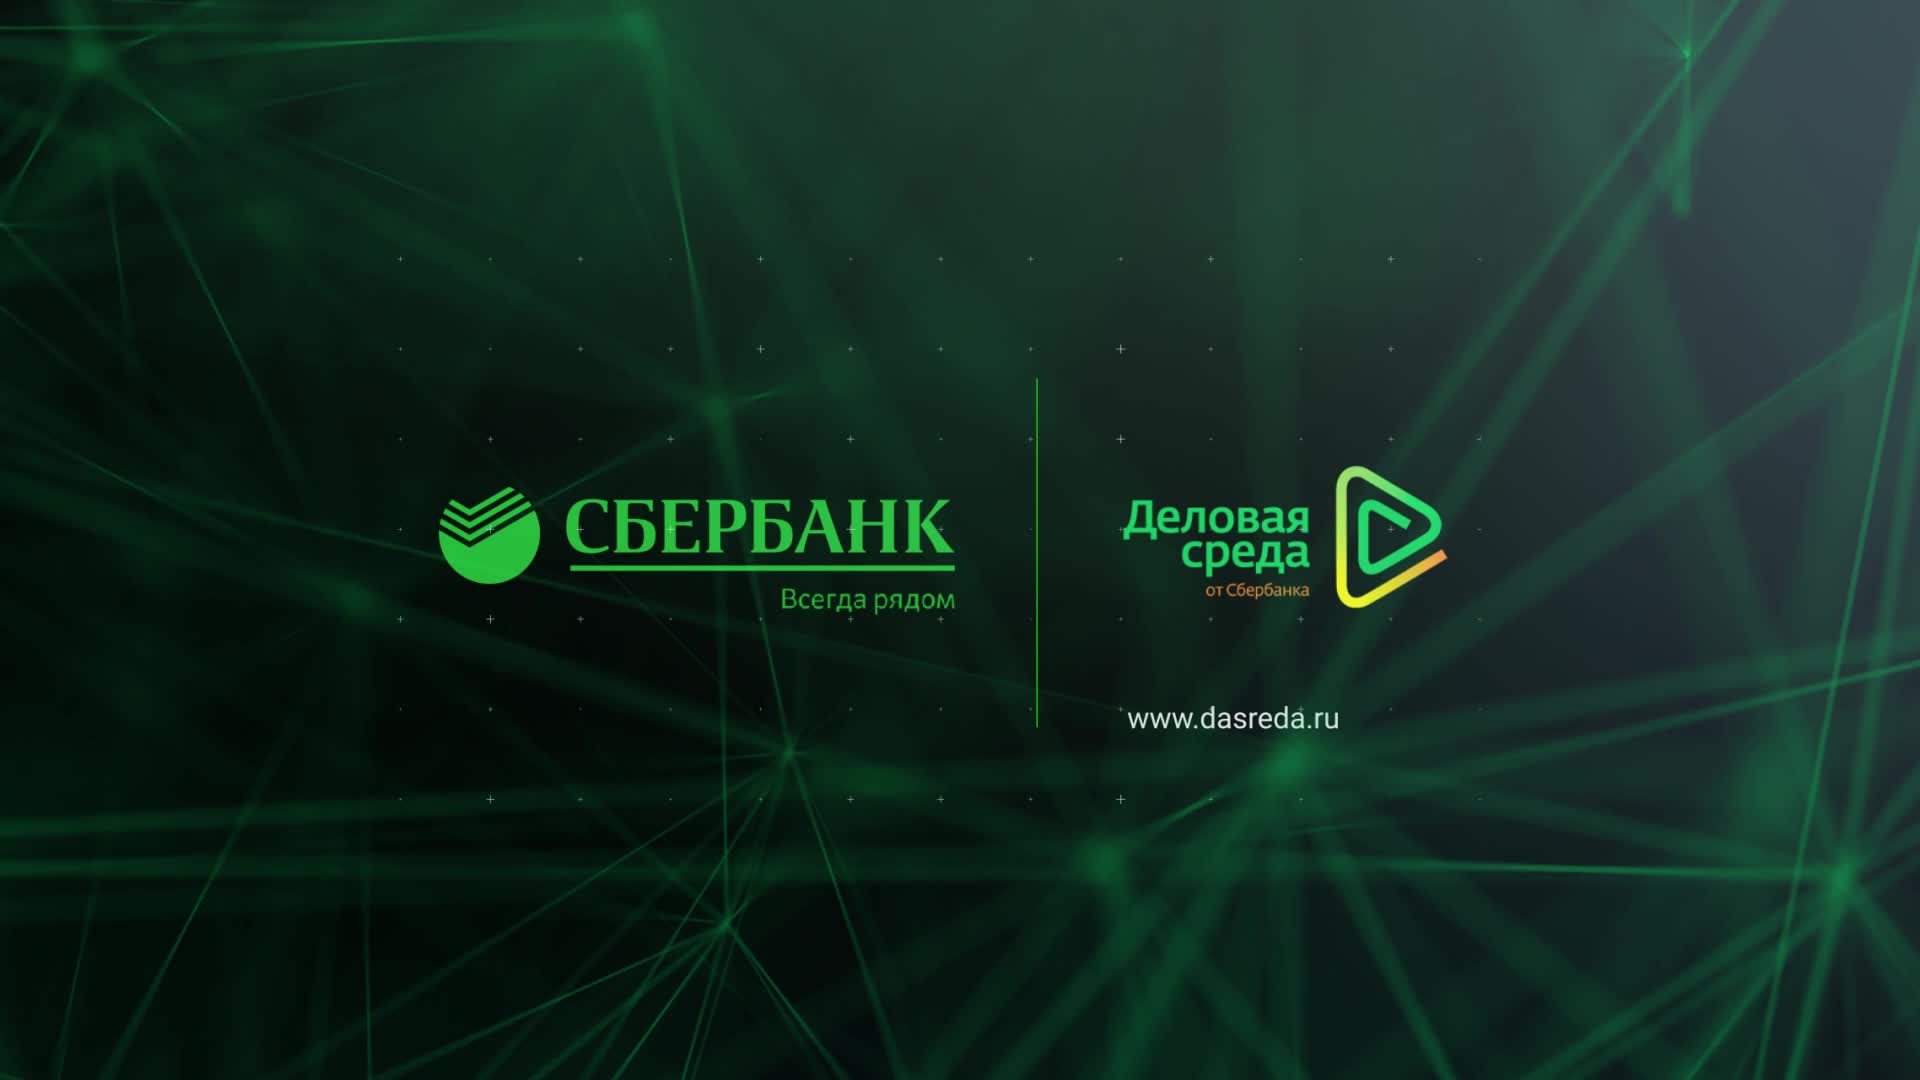 Sberbank > Business registration and remote account opening